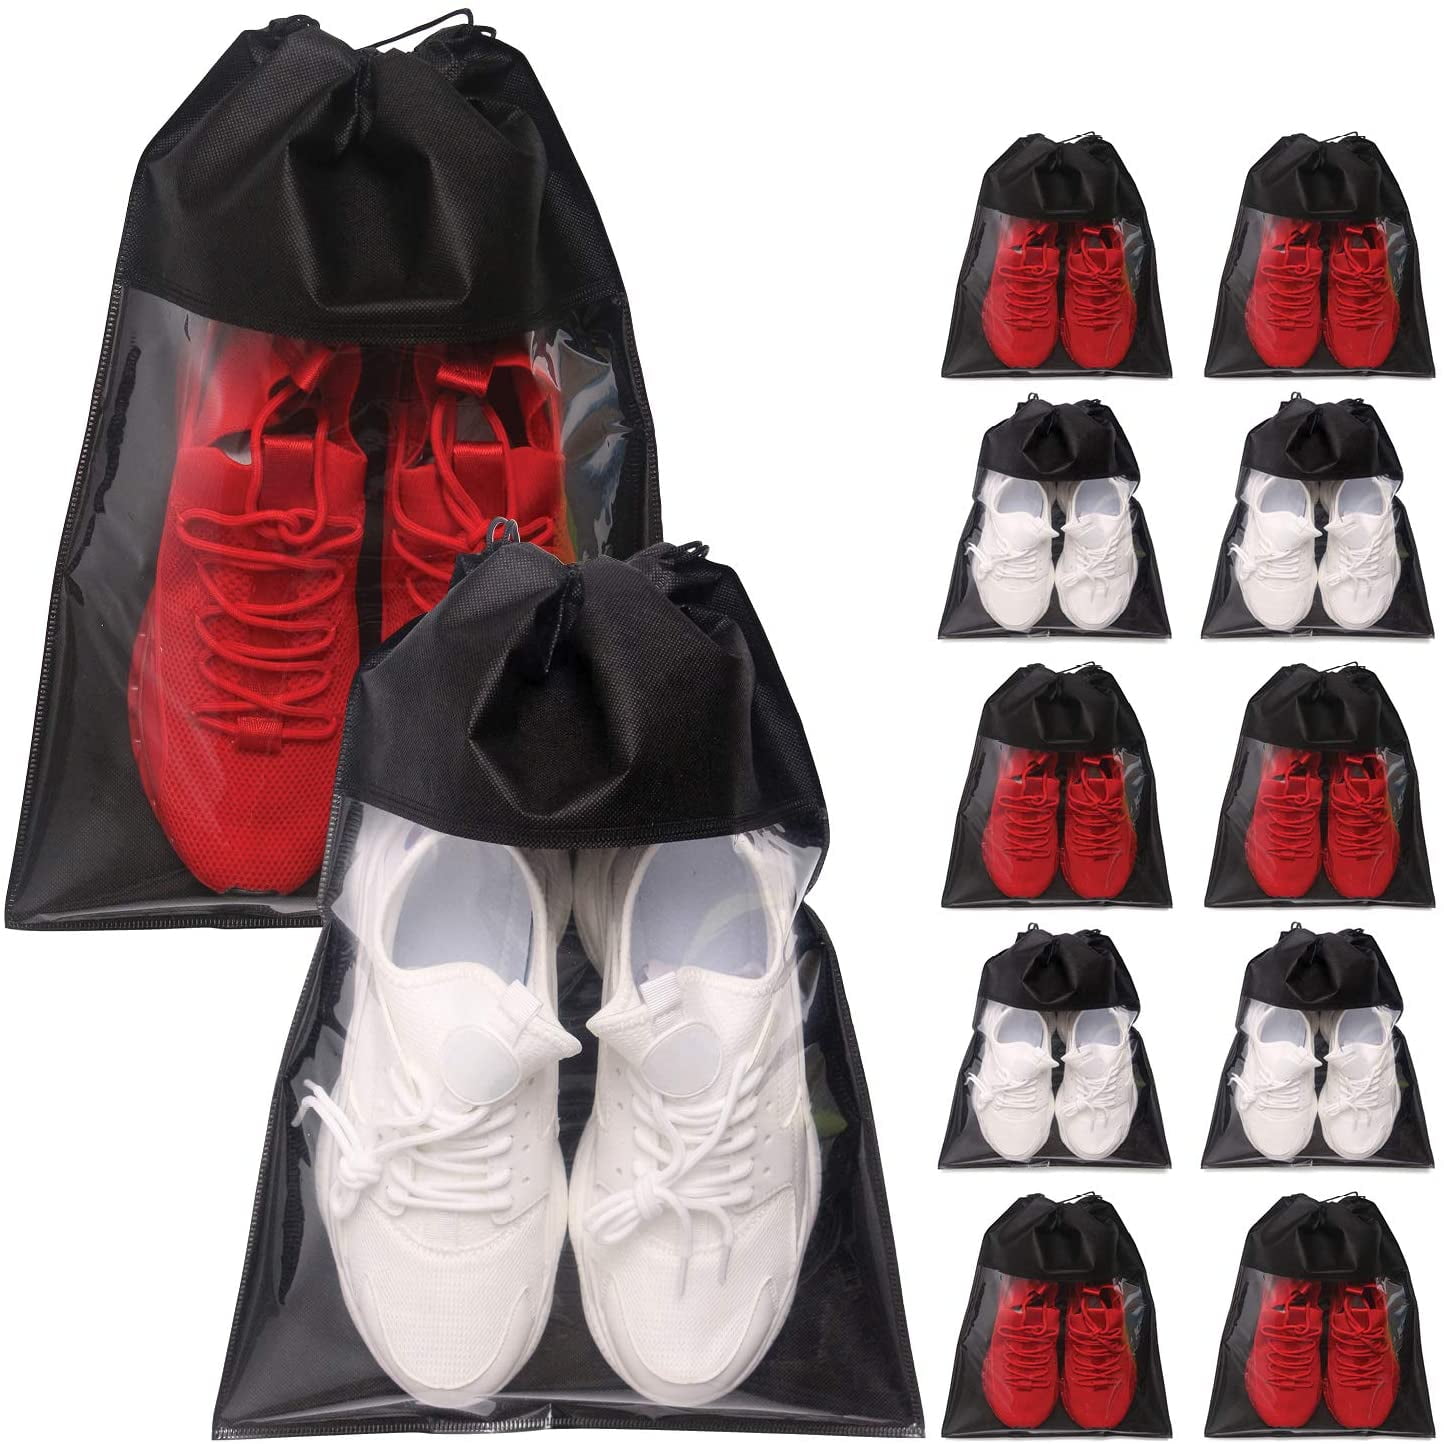 SPIKG Shoe Bags for Travel Shoe Bag Portable Travel Shoe Bags for Packing Clear Drawstring Bags Travel Shoe Bags for Women and Men Shoe Organizer 